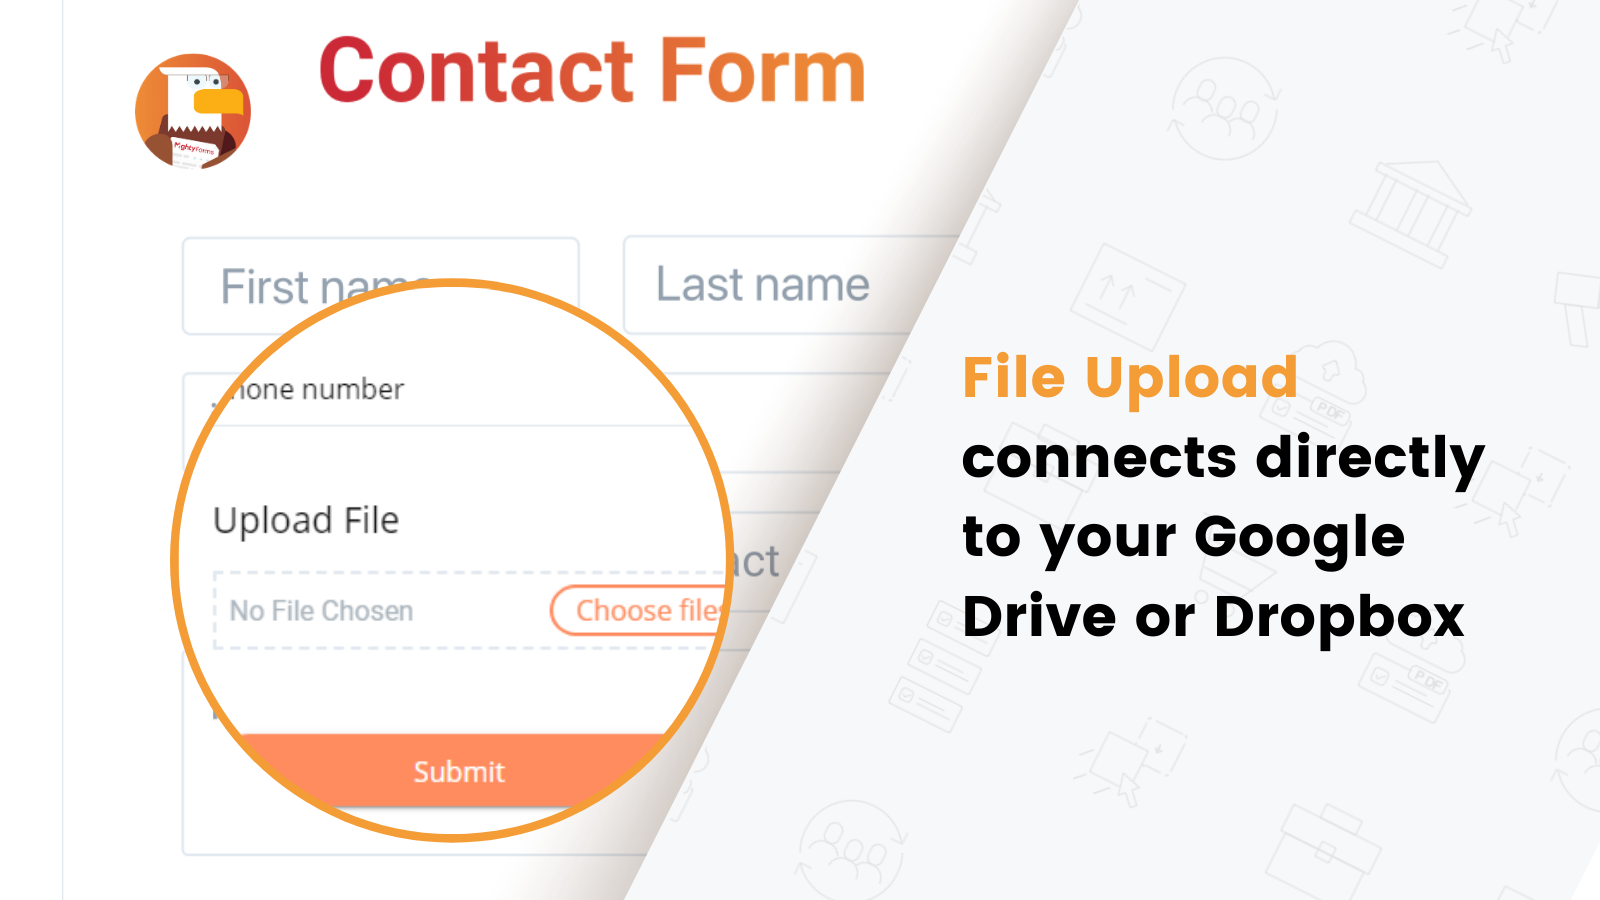 Upload File field connects with your Google Drive or Dropbox